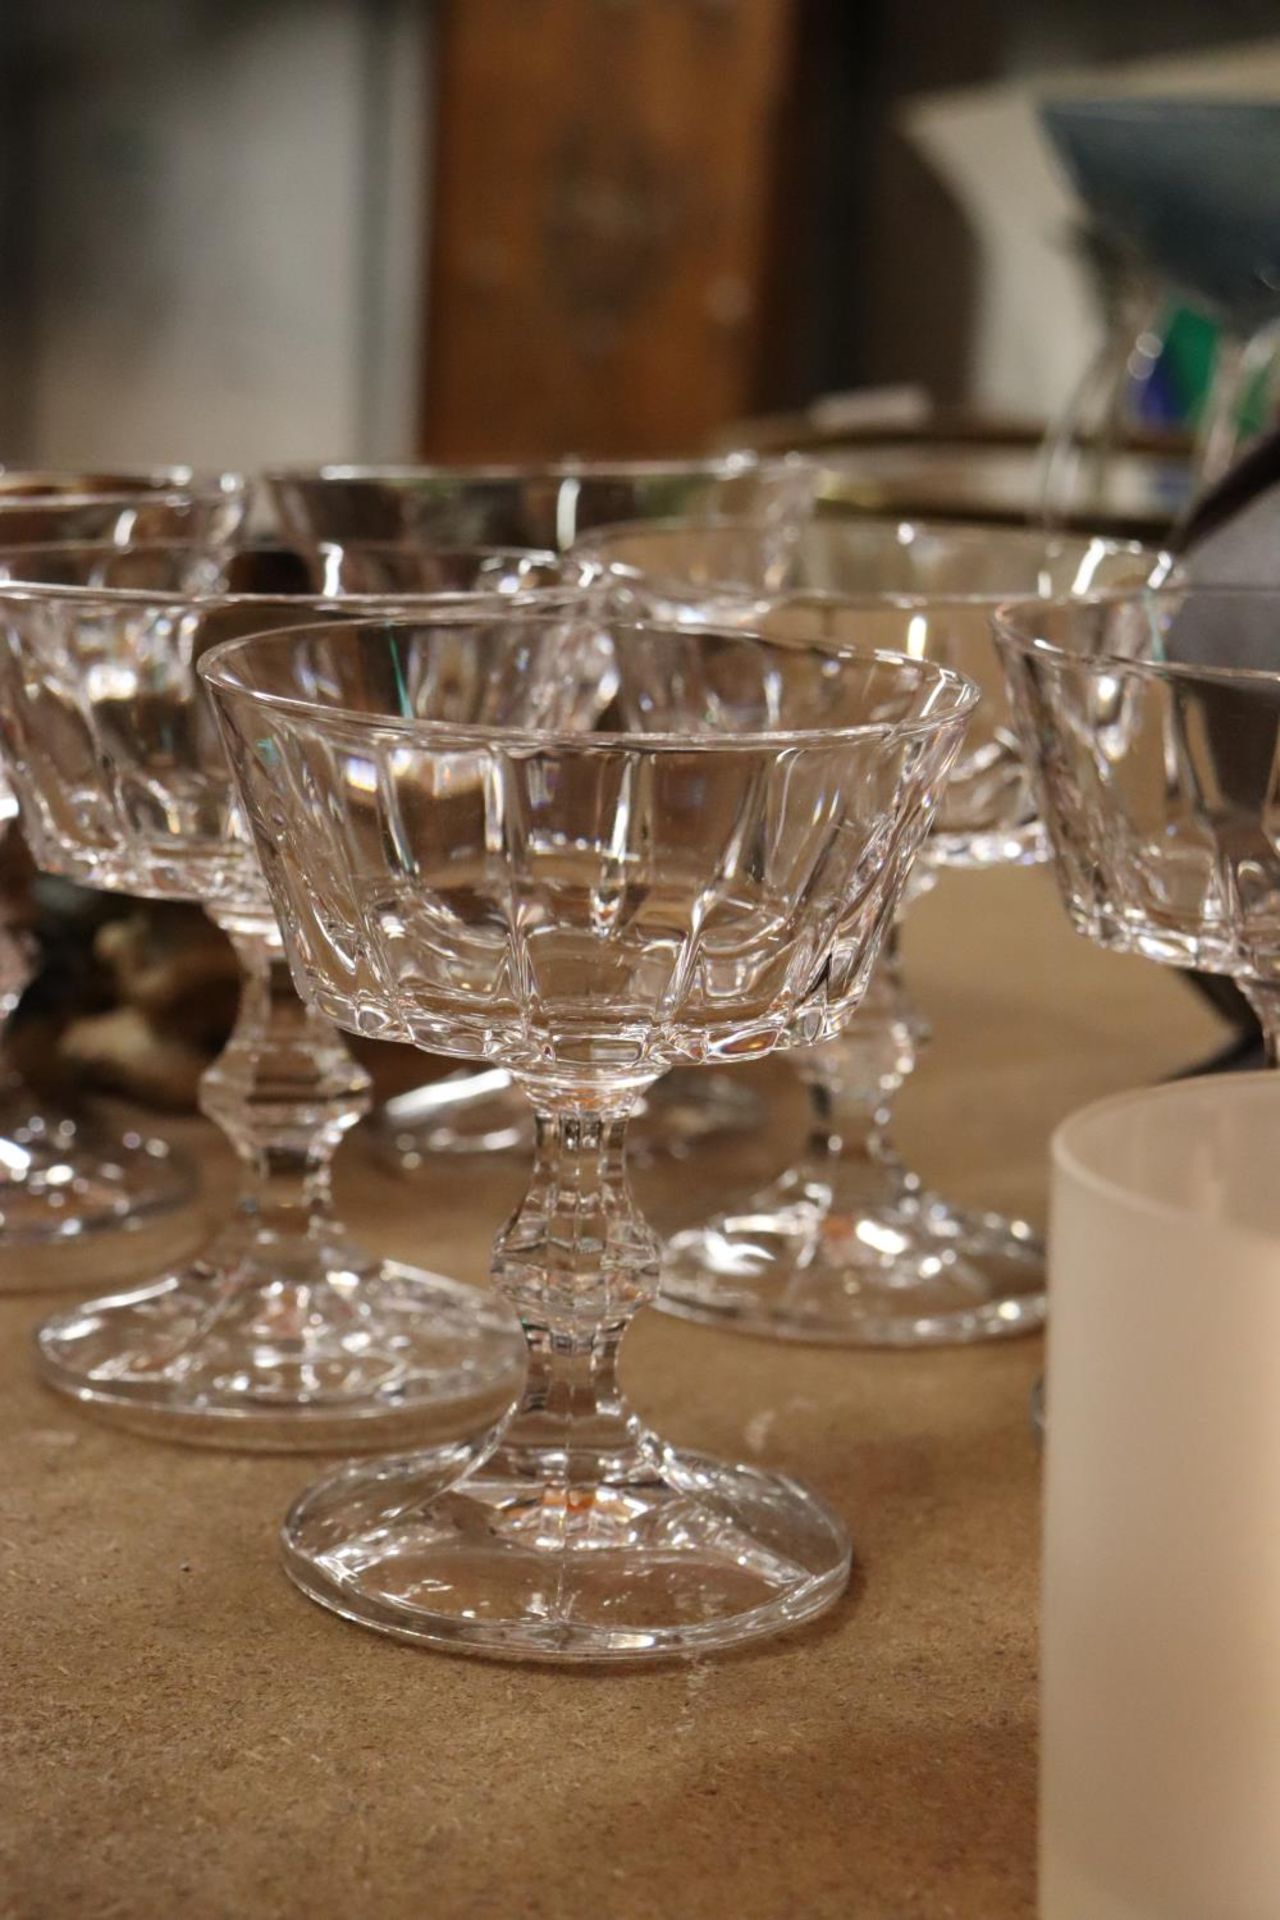 SIX GLASS SUNDAE DISHES TOGETHER WITH SIX DRINKING GLASSES ETCHED WITH ANIMALS - Image 2 of 4